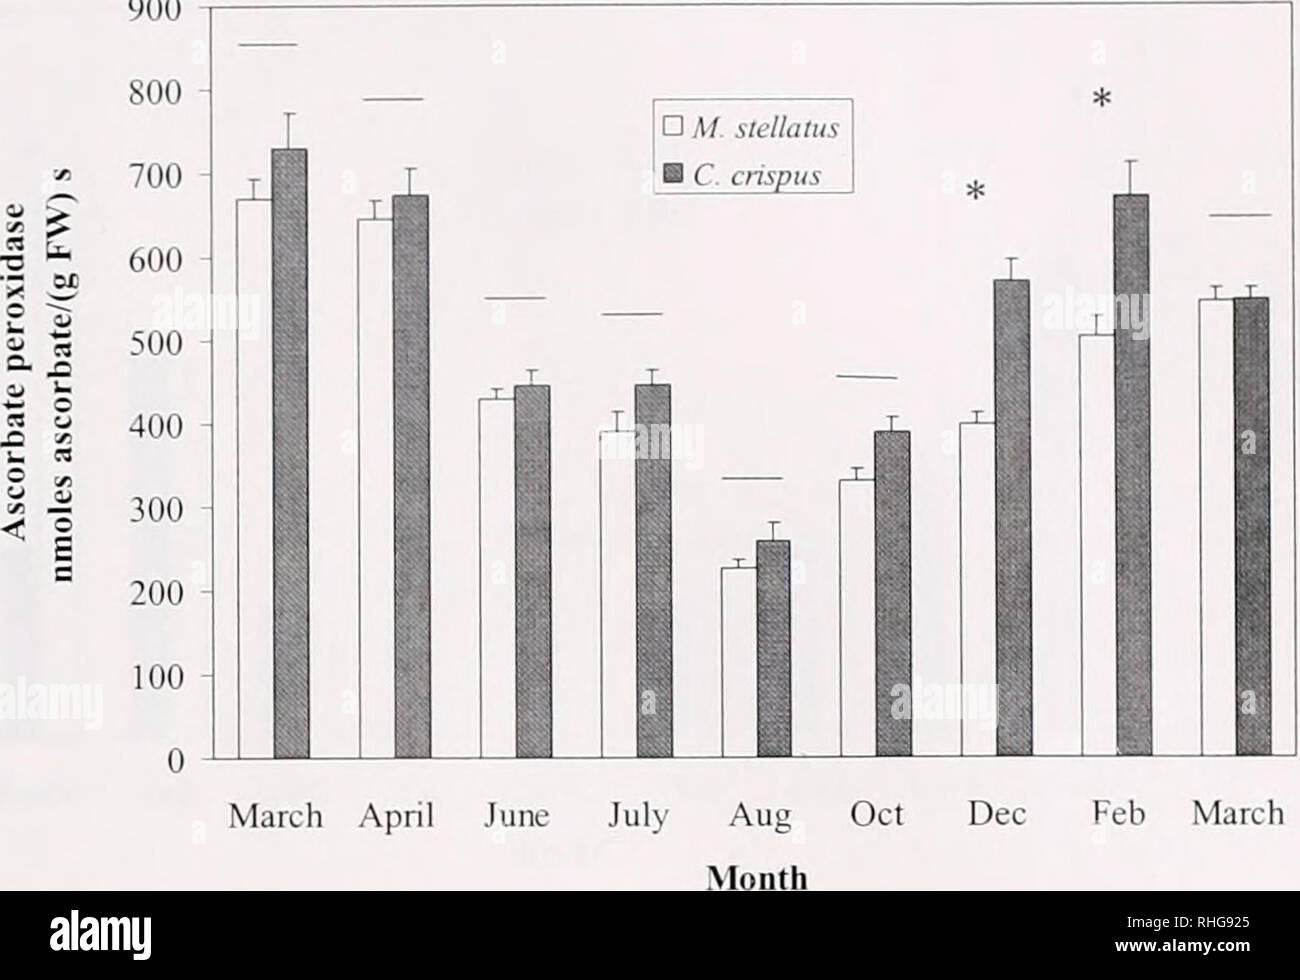 . The Biological bulletin. Biology; Zoology; Biology; Marine Biology. ACCLIMATIZATION OF ANT1OXIDANTS IN RED ALGAE 229 900. March April Feb March Figure 2. Ascorbate peroxidase activity, by month, for Chondrus crispus (dark bars) and Mastocarpus stellatus (white bars). When analyzed by mean monthly temperature, there were significant differences by temperature (/Yii* 0.05) between species in a given month, and an asterisk indicates significant difference (P &lt; 0.05). Error bars are one standard error; n = 5-10.. Please note that these images are extracted from scanned page images that may ha Stock Photo